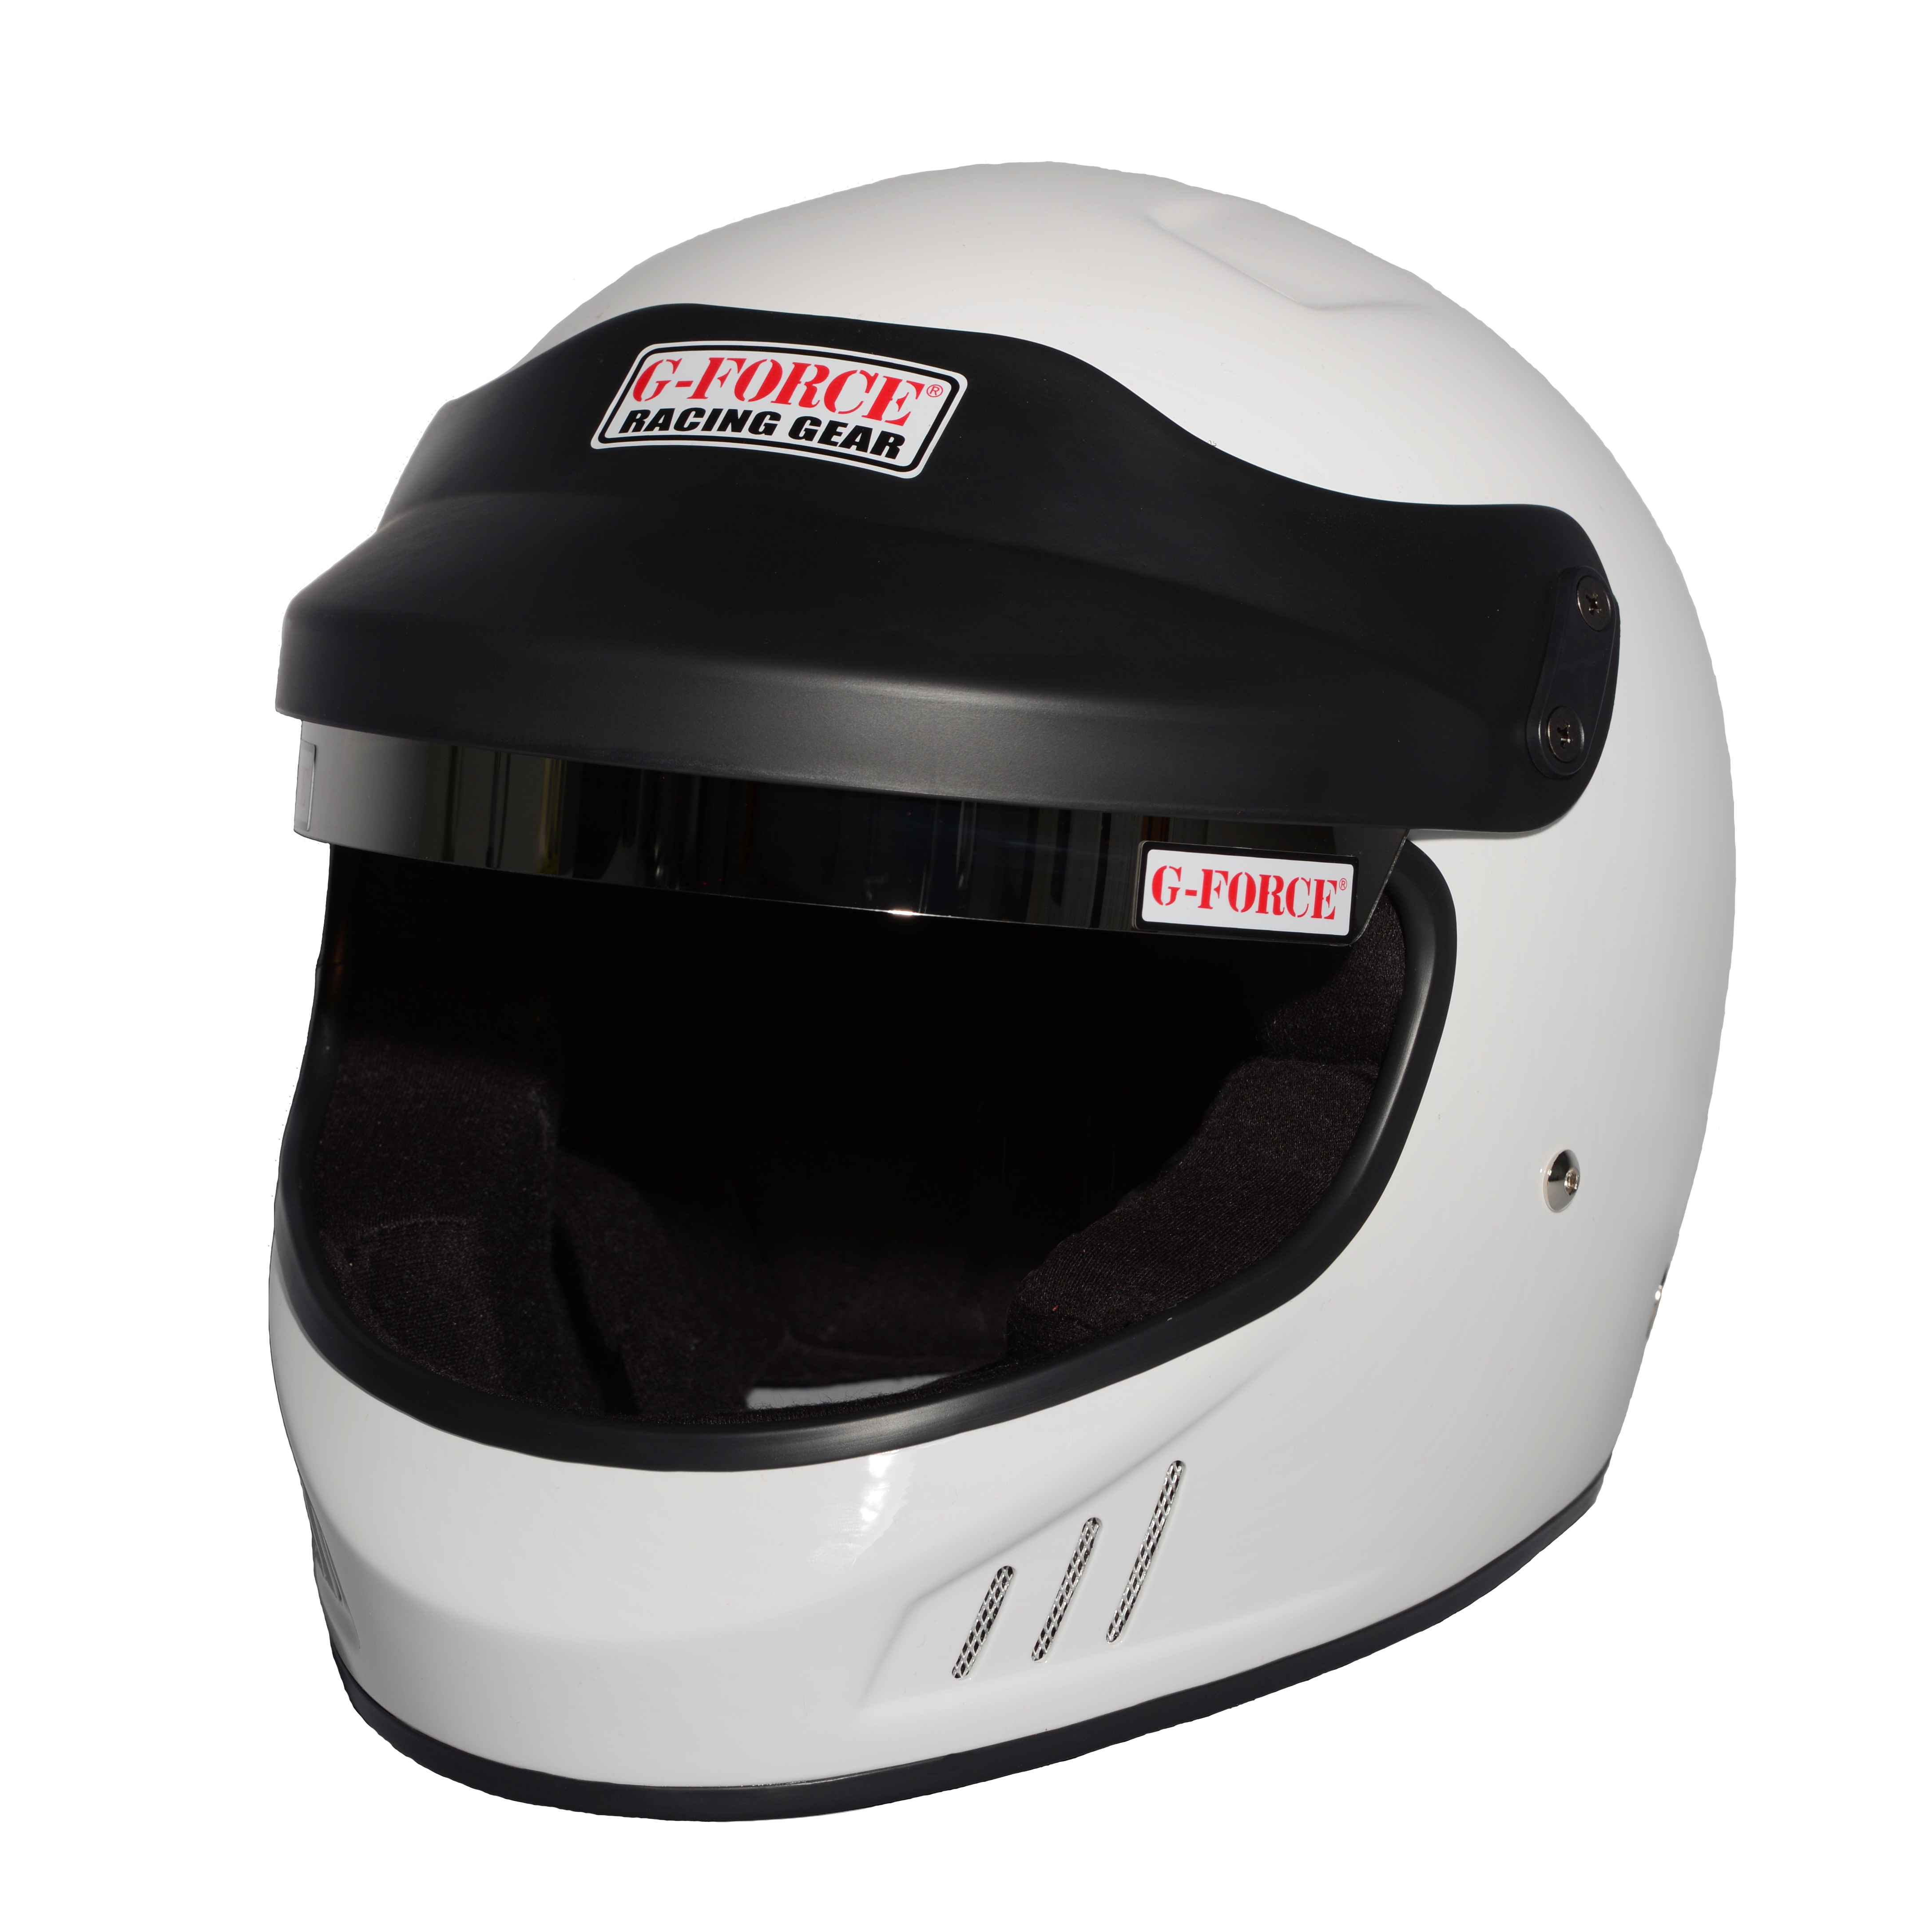 G-Force Racing Gear Helmet, MODIFIED SA2010 FULL FACE LARGE WHITE